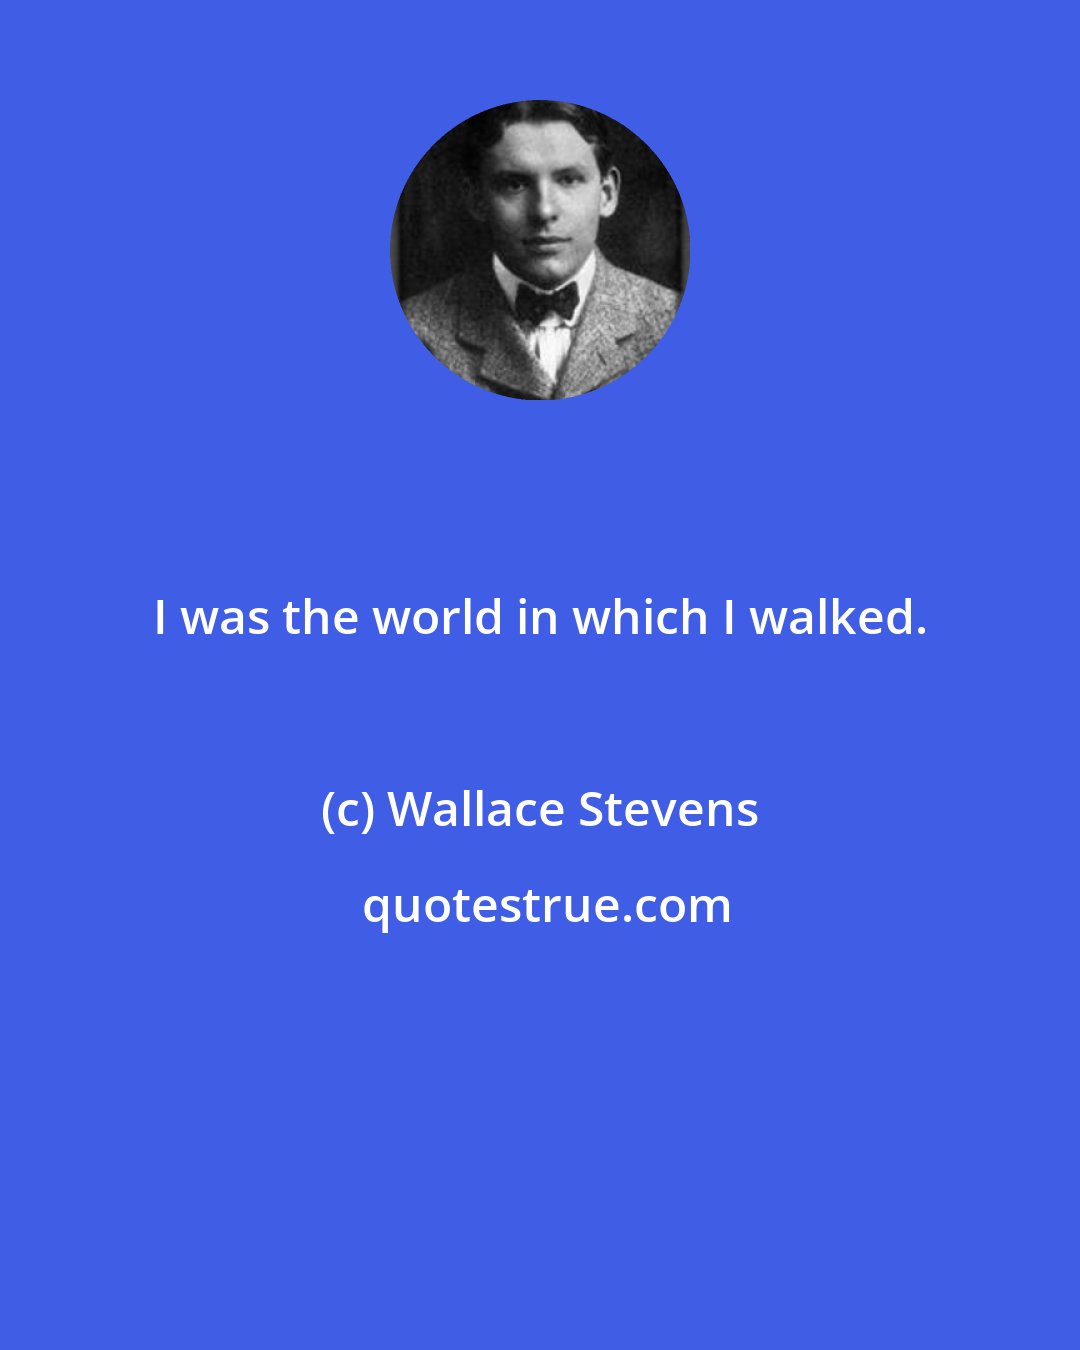 Wallace Stevens: I was the world in which I walked.